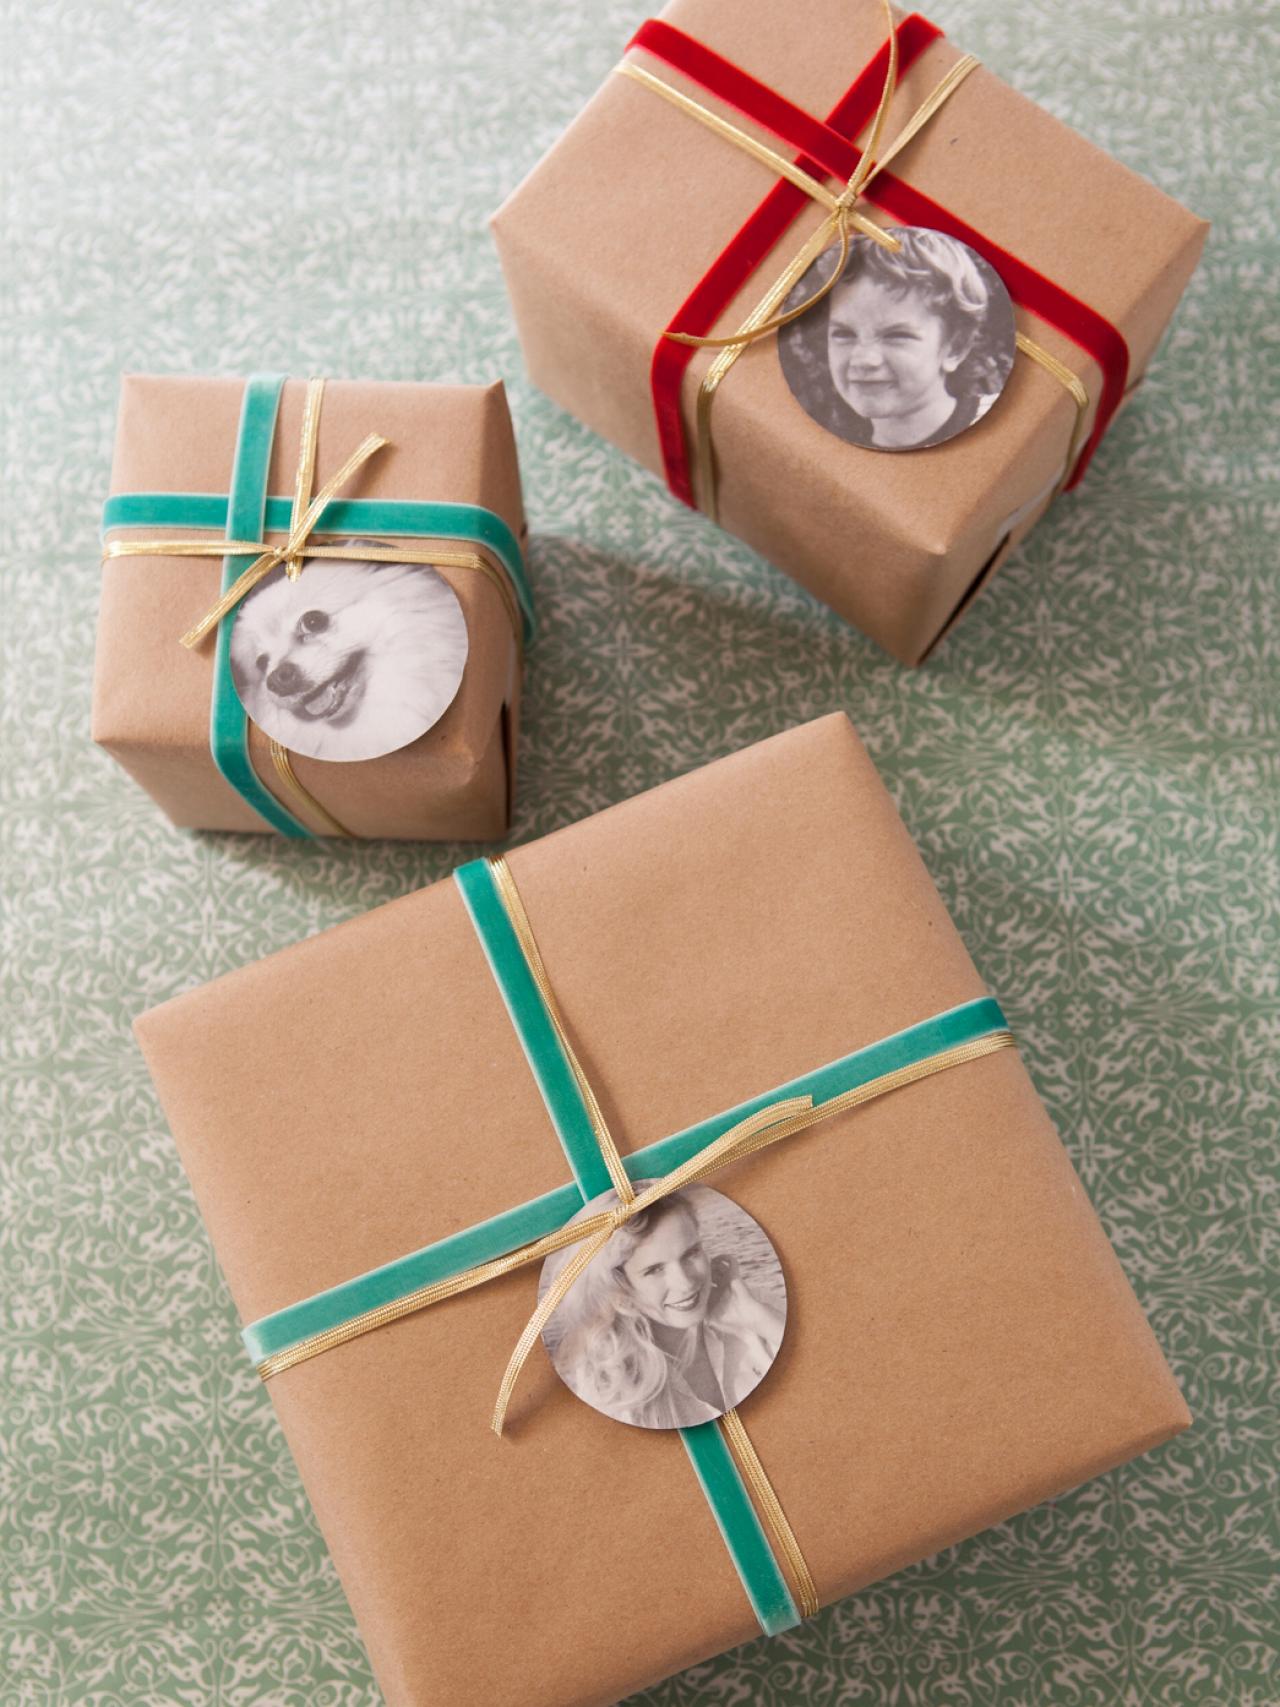 20 DIY Christmas Gift Toppers You'll Love - Shelterness